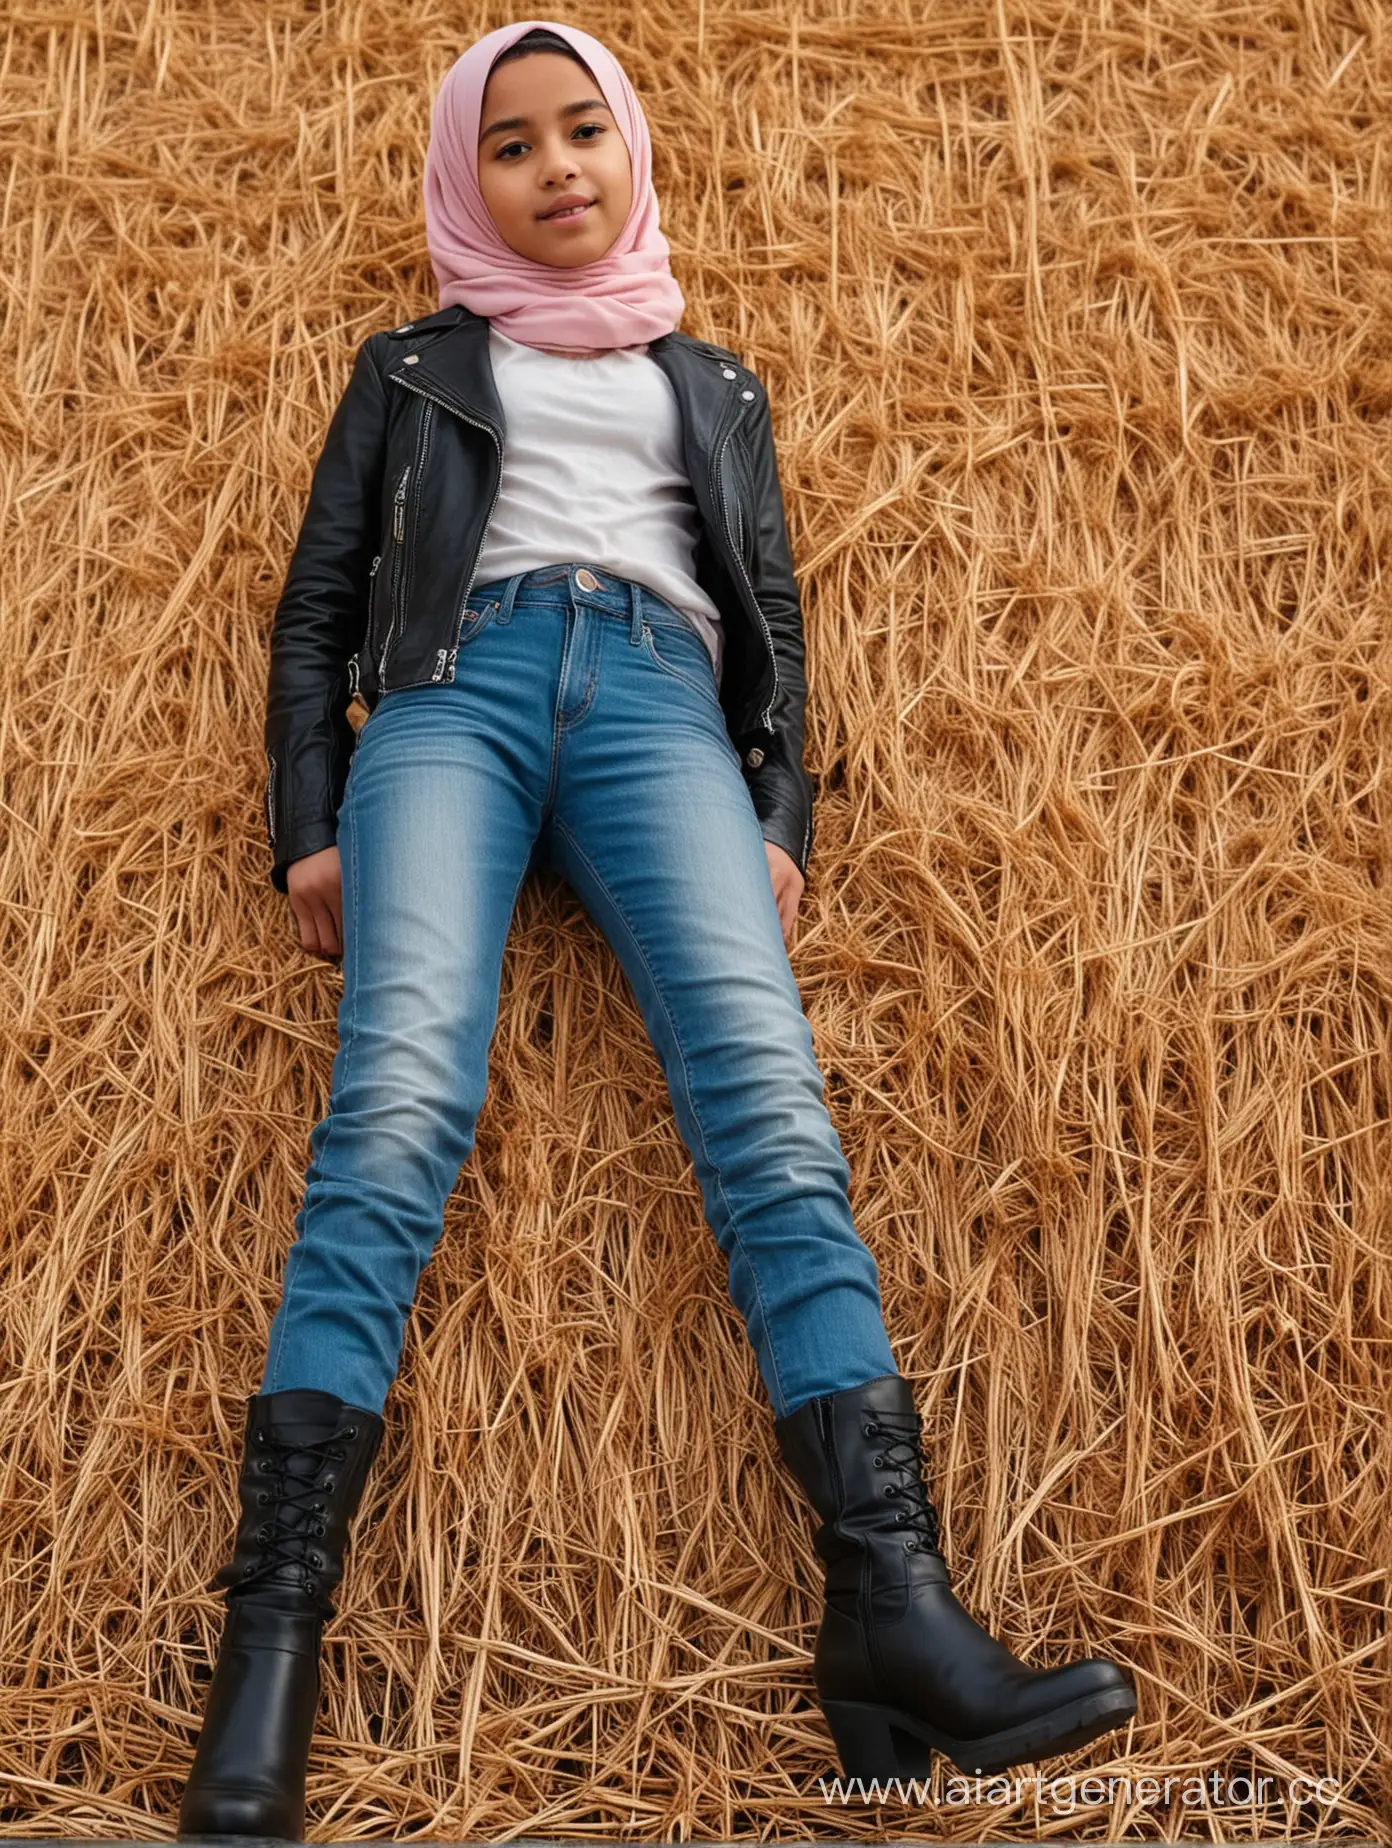 A little girl. 12 years old. She wears a hijab, high waist skinny jeans, leathet jacket, knee-high boots. Her height is 130cm. Close pov shot. Close up. From below. 8k sharp. British. Pretty face. Hay bales.